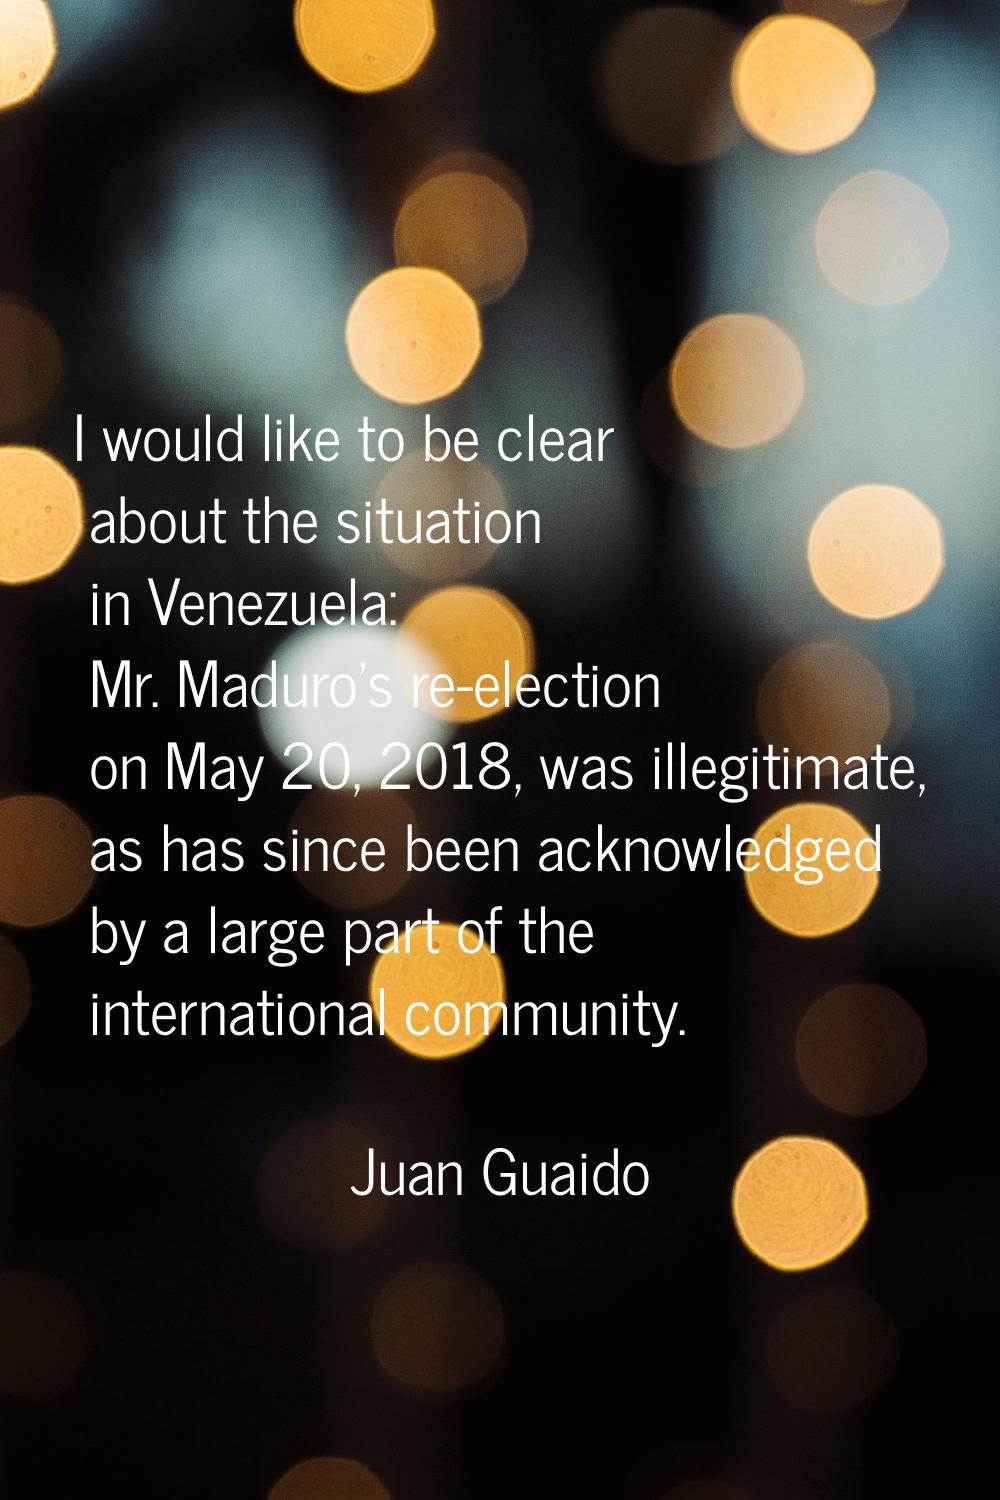 I would like to be clear about the situation in Venezuela: Mr. Maduro's re-election on May 20, 2018